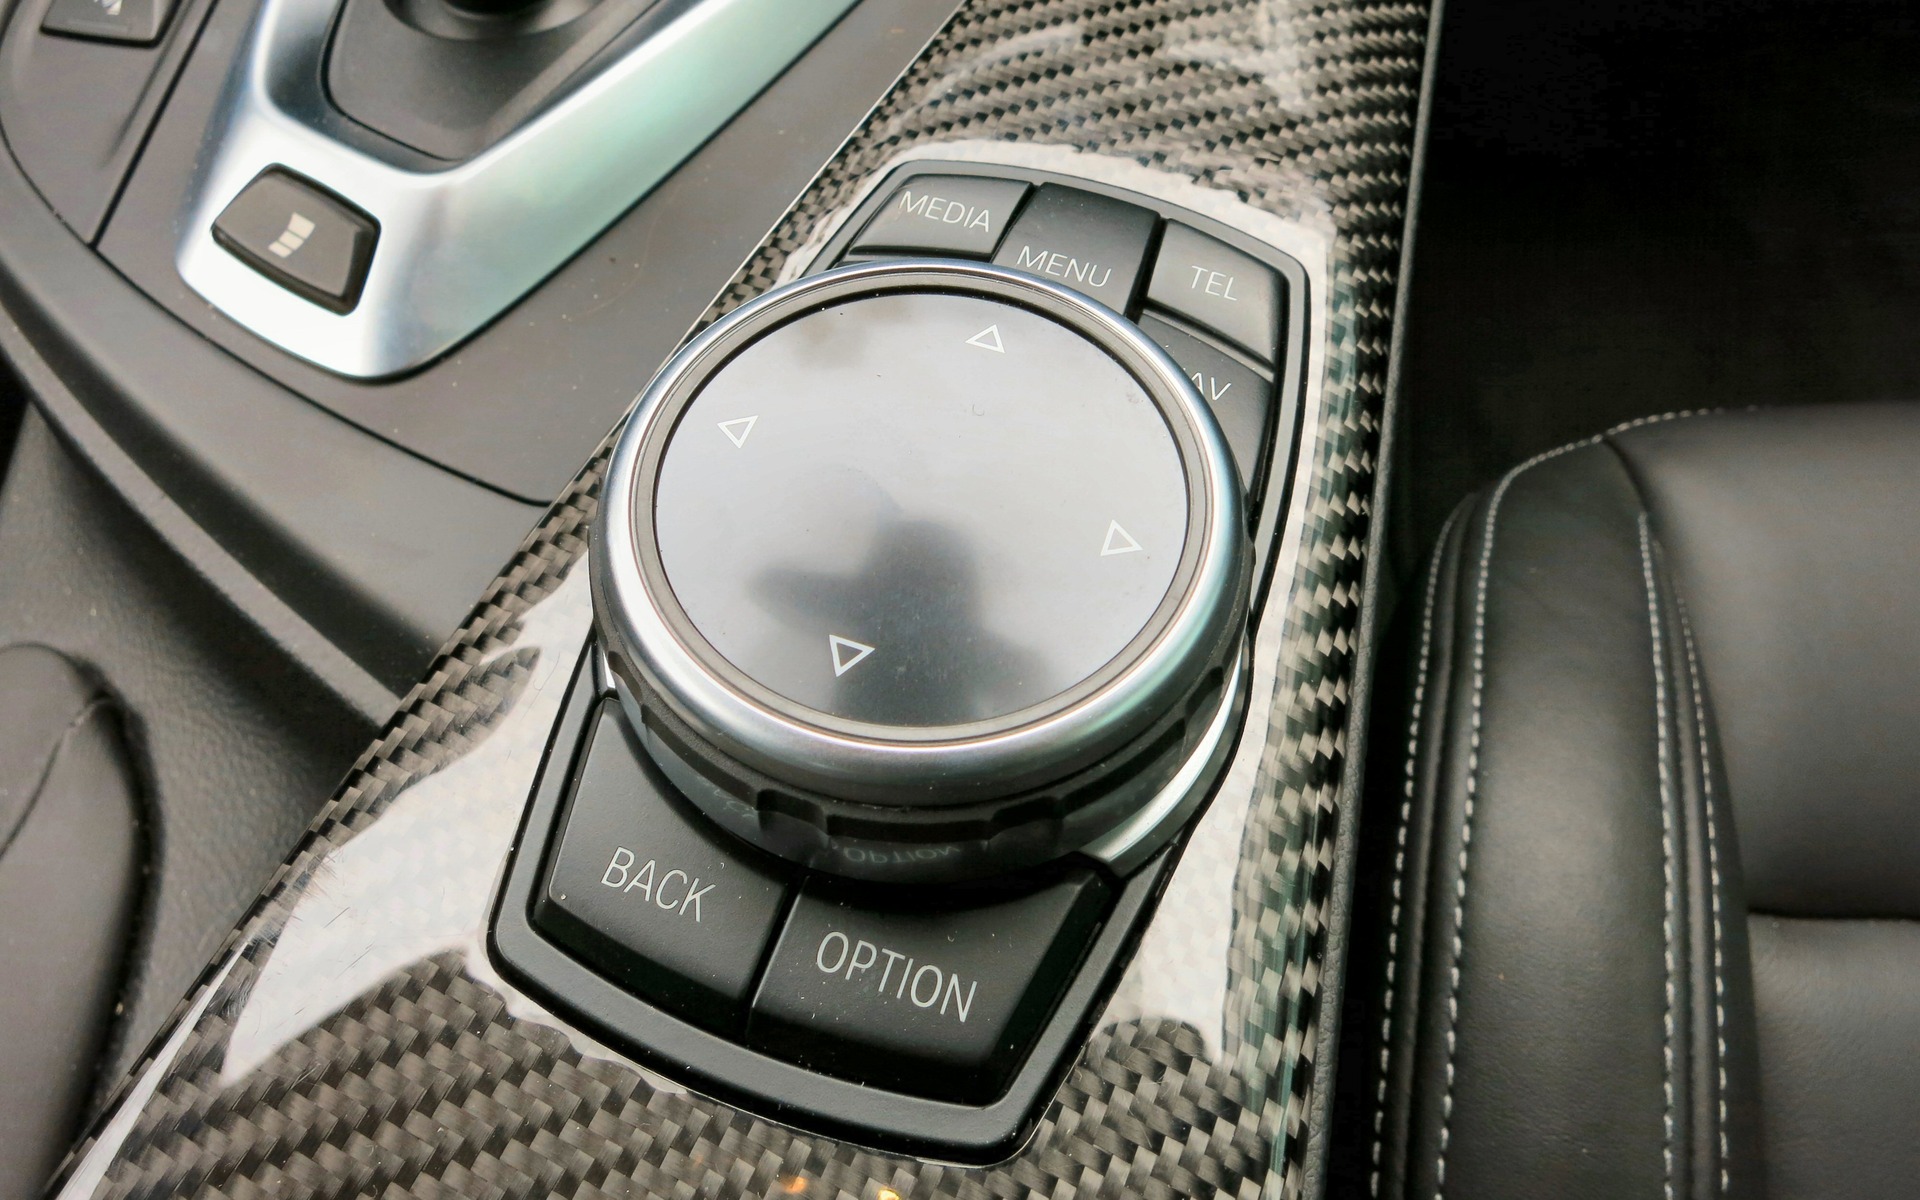 The iDrive system substitutes a rotary dial for a touchscreen.